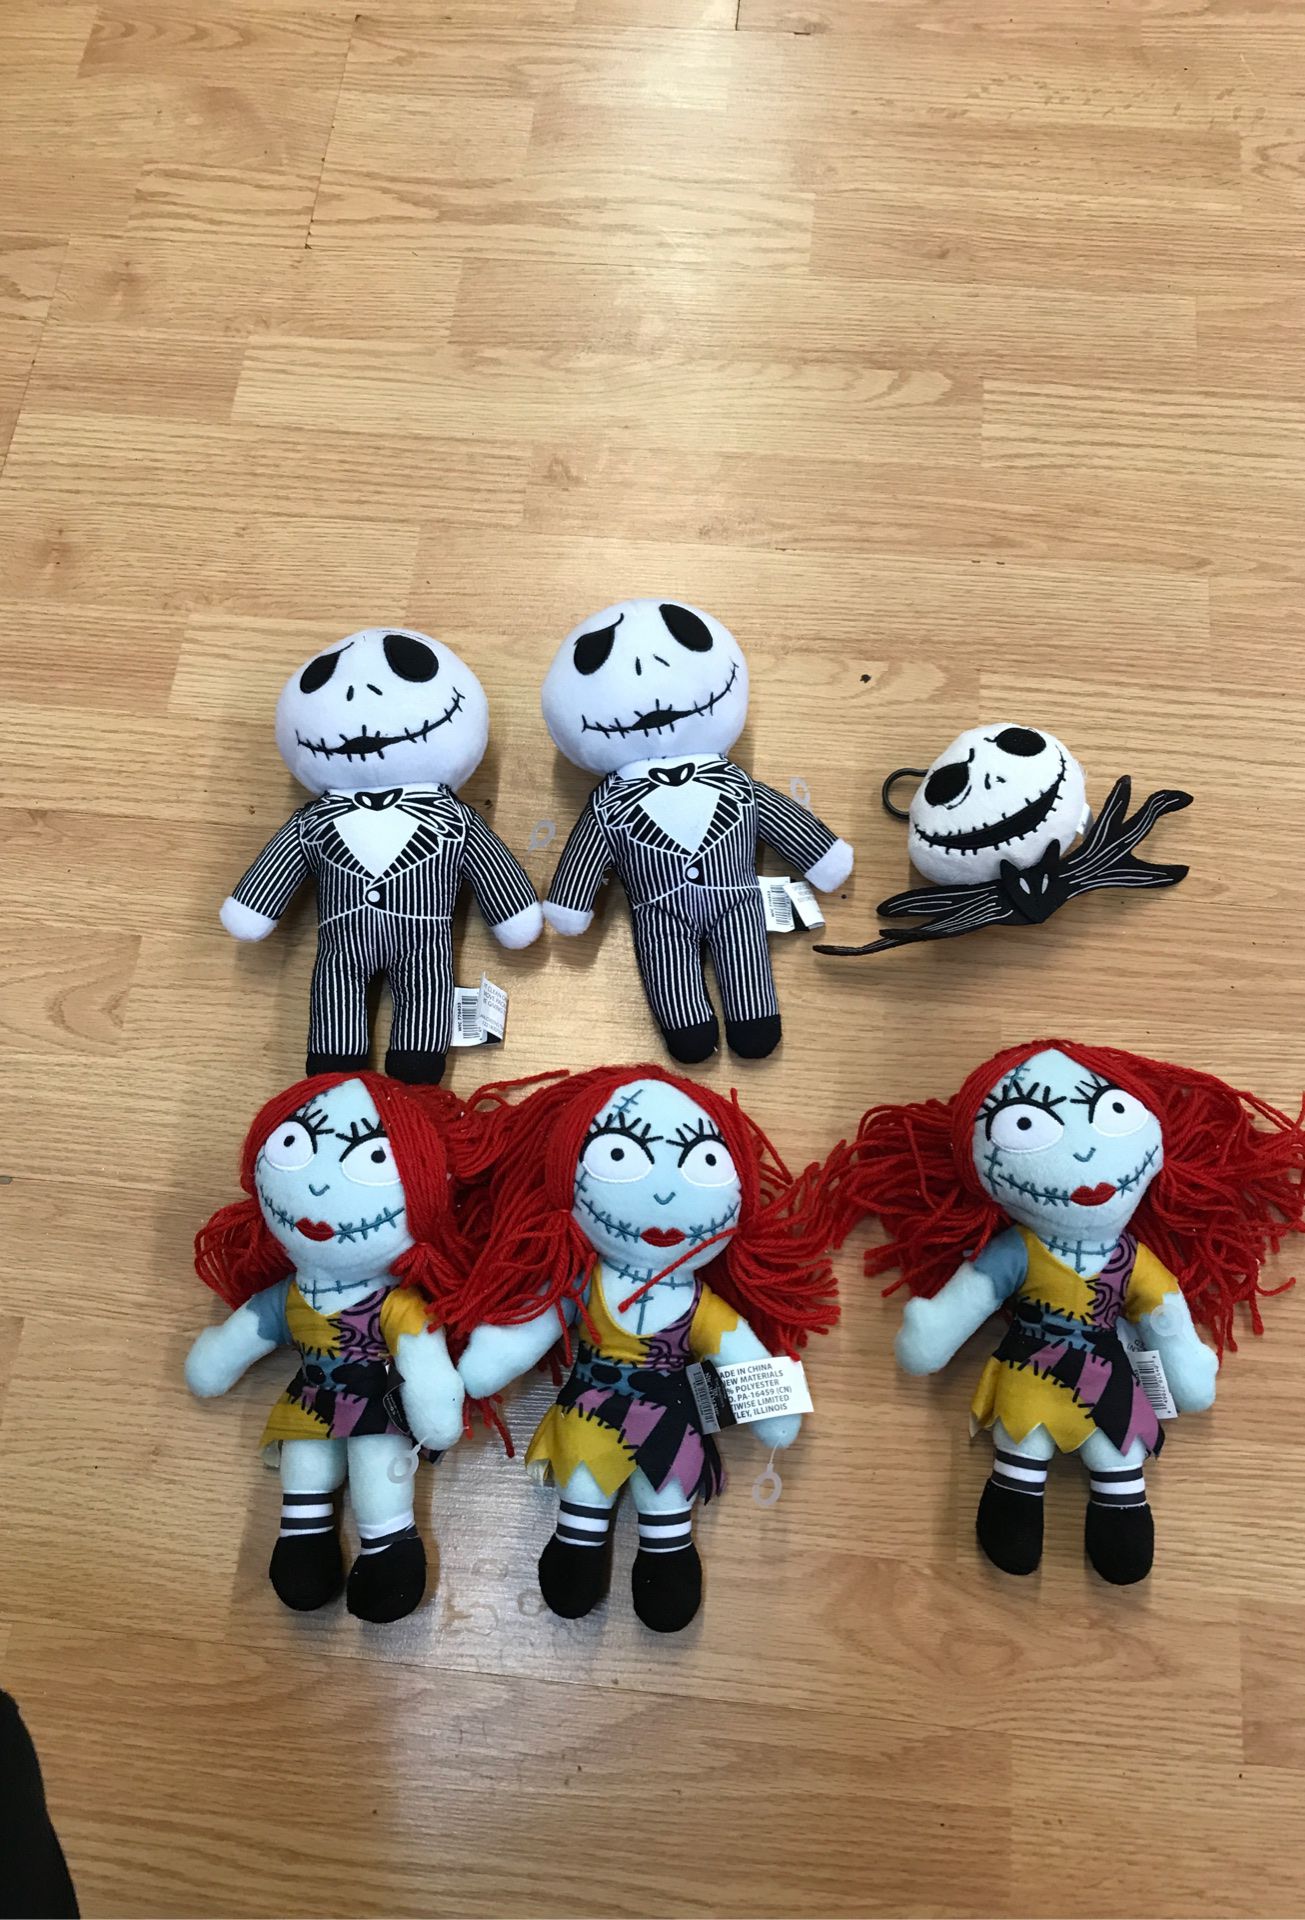 The nightmare before Christmas $4 each